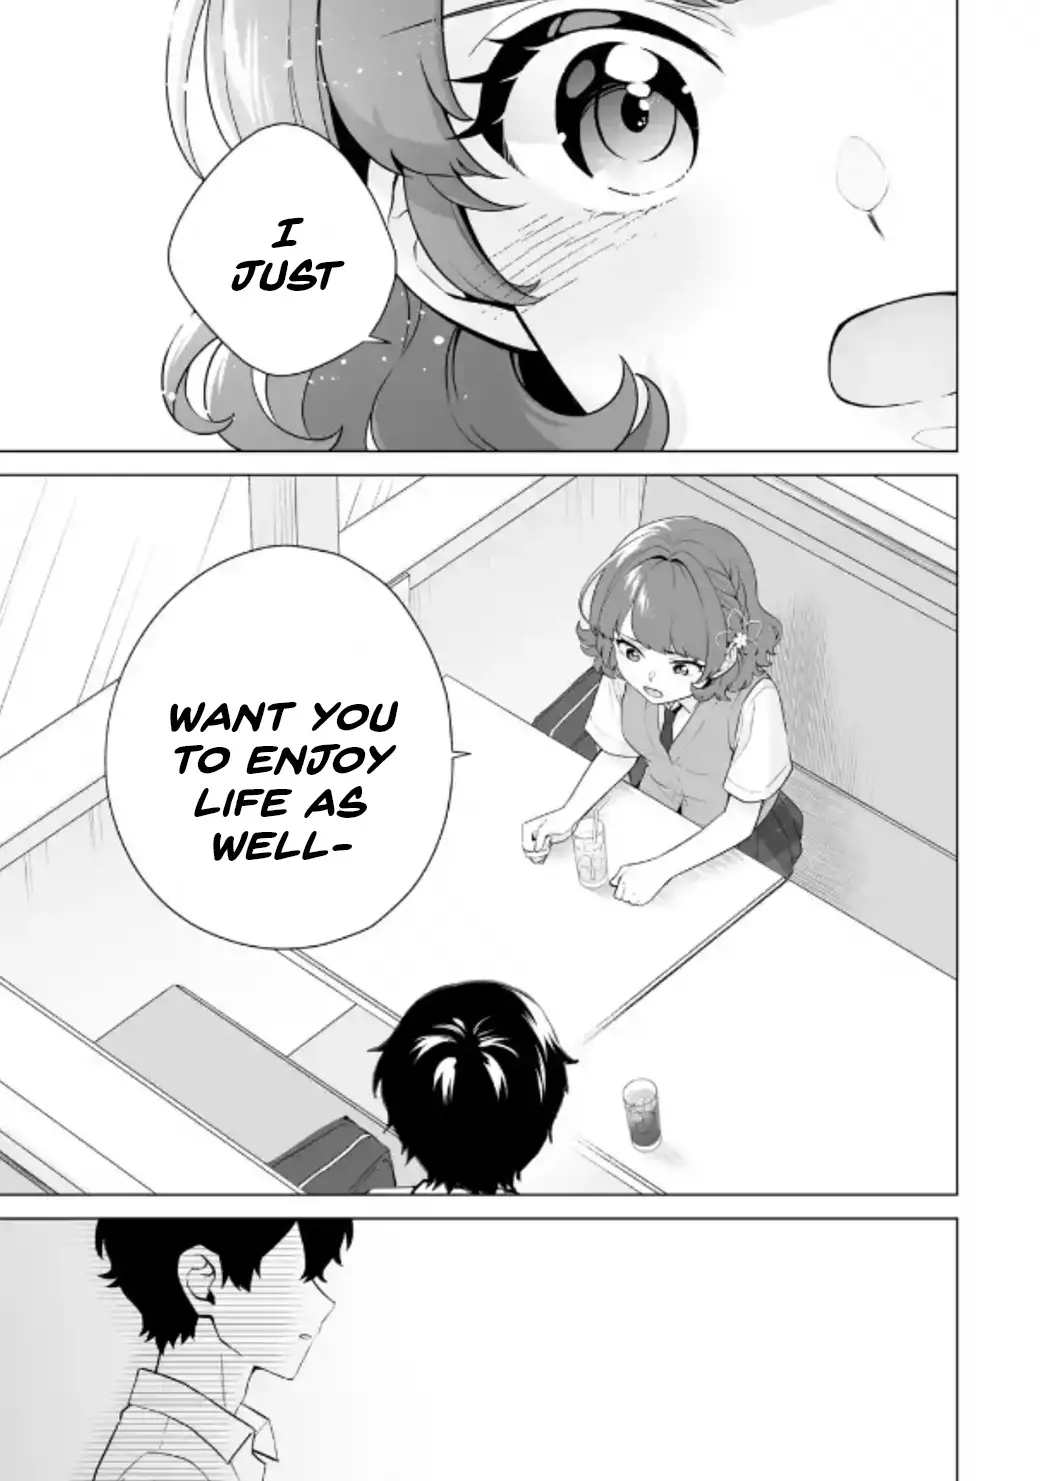 Please Leave Me Alone (For Some Reason, She Wants To Change A Lone Wolf's Helpless High School Life.) - 12 page 23-5f65440f